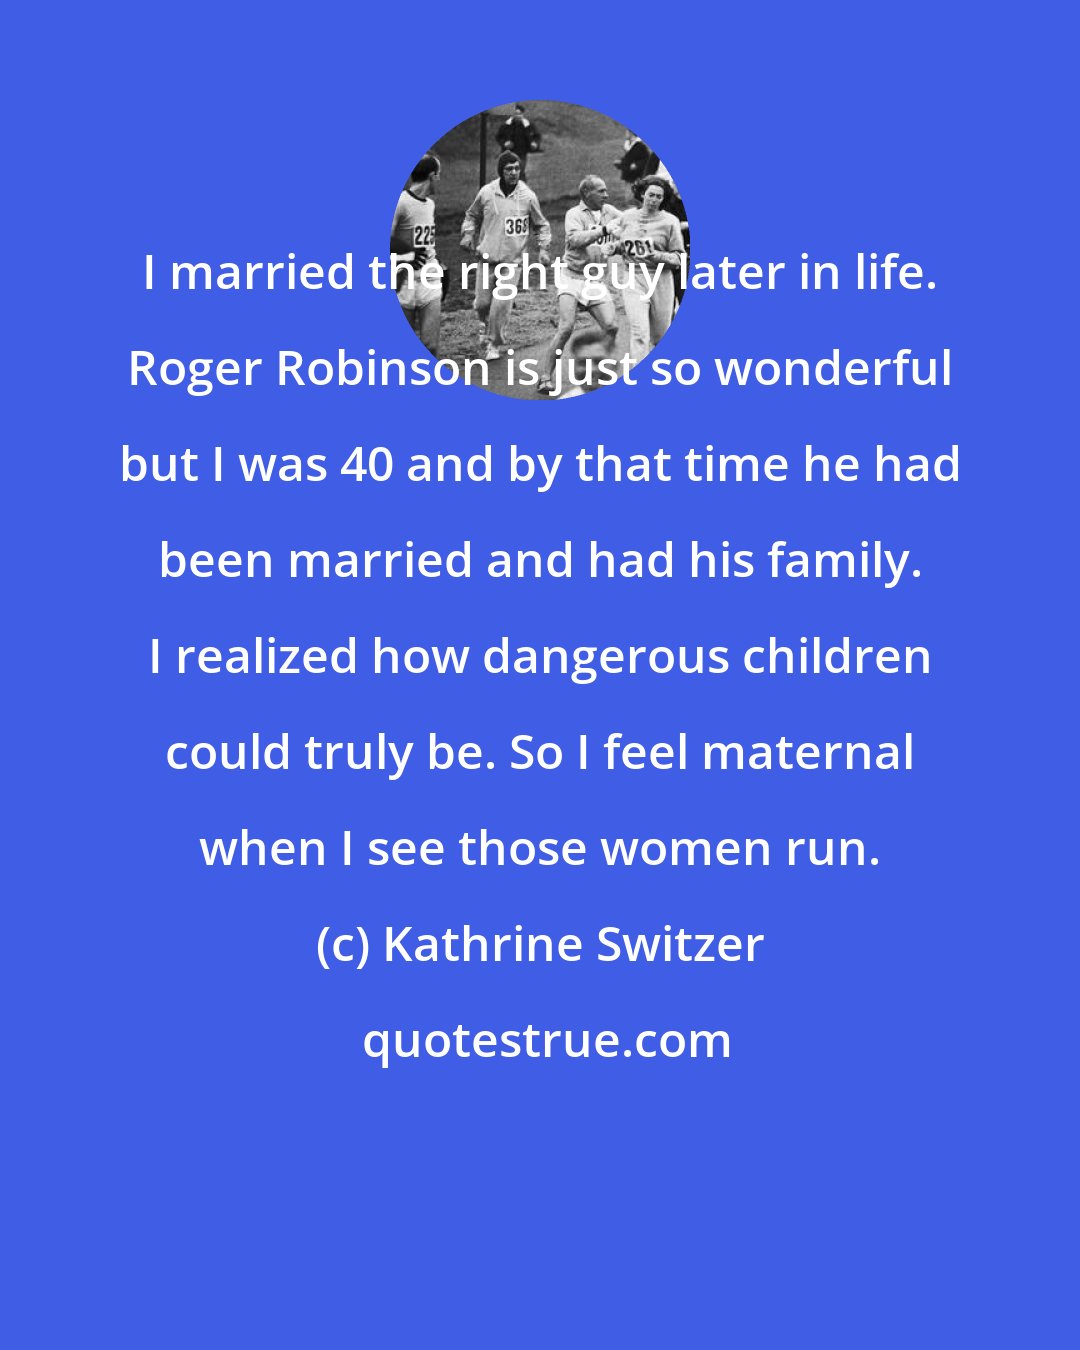 Kathrine Switzer: I married the right guy later in life. Roger Robinson is just so wonderful but I was 40 and by that time he had been married and had his family. I realized how dangerous children could truly be. So I feel maternal when I see those women run.